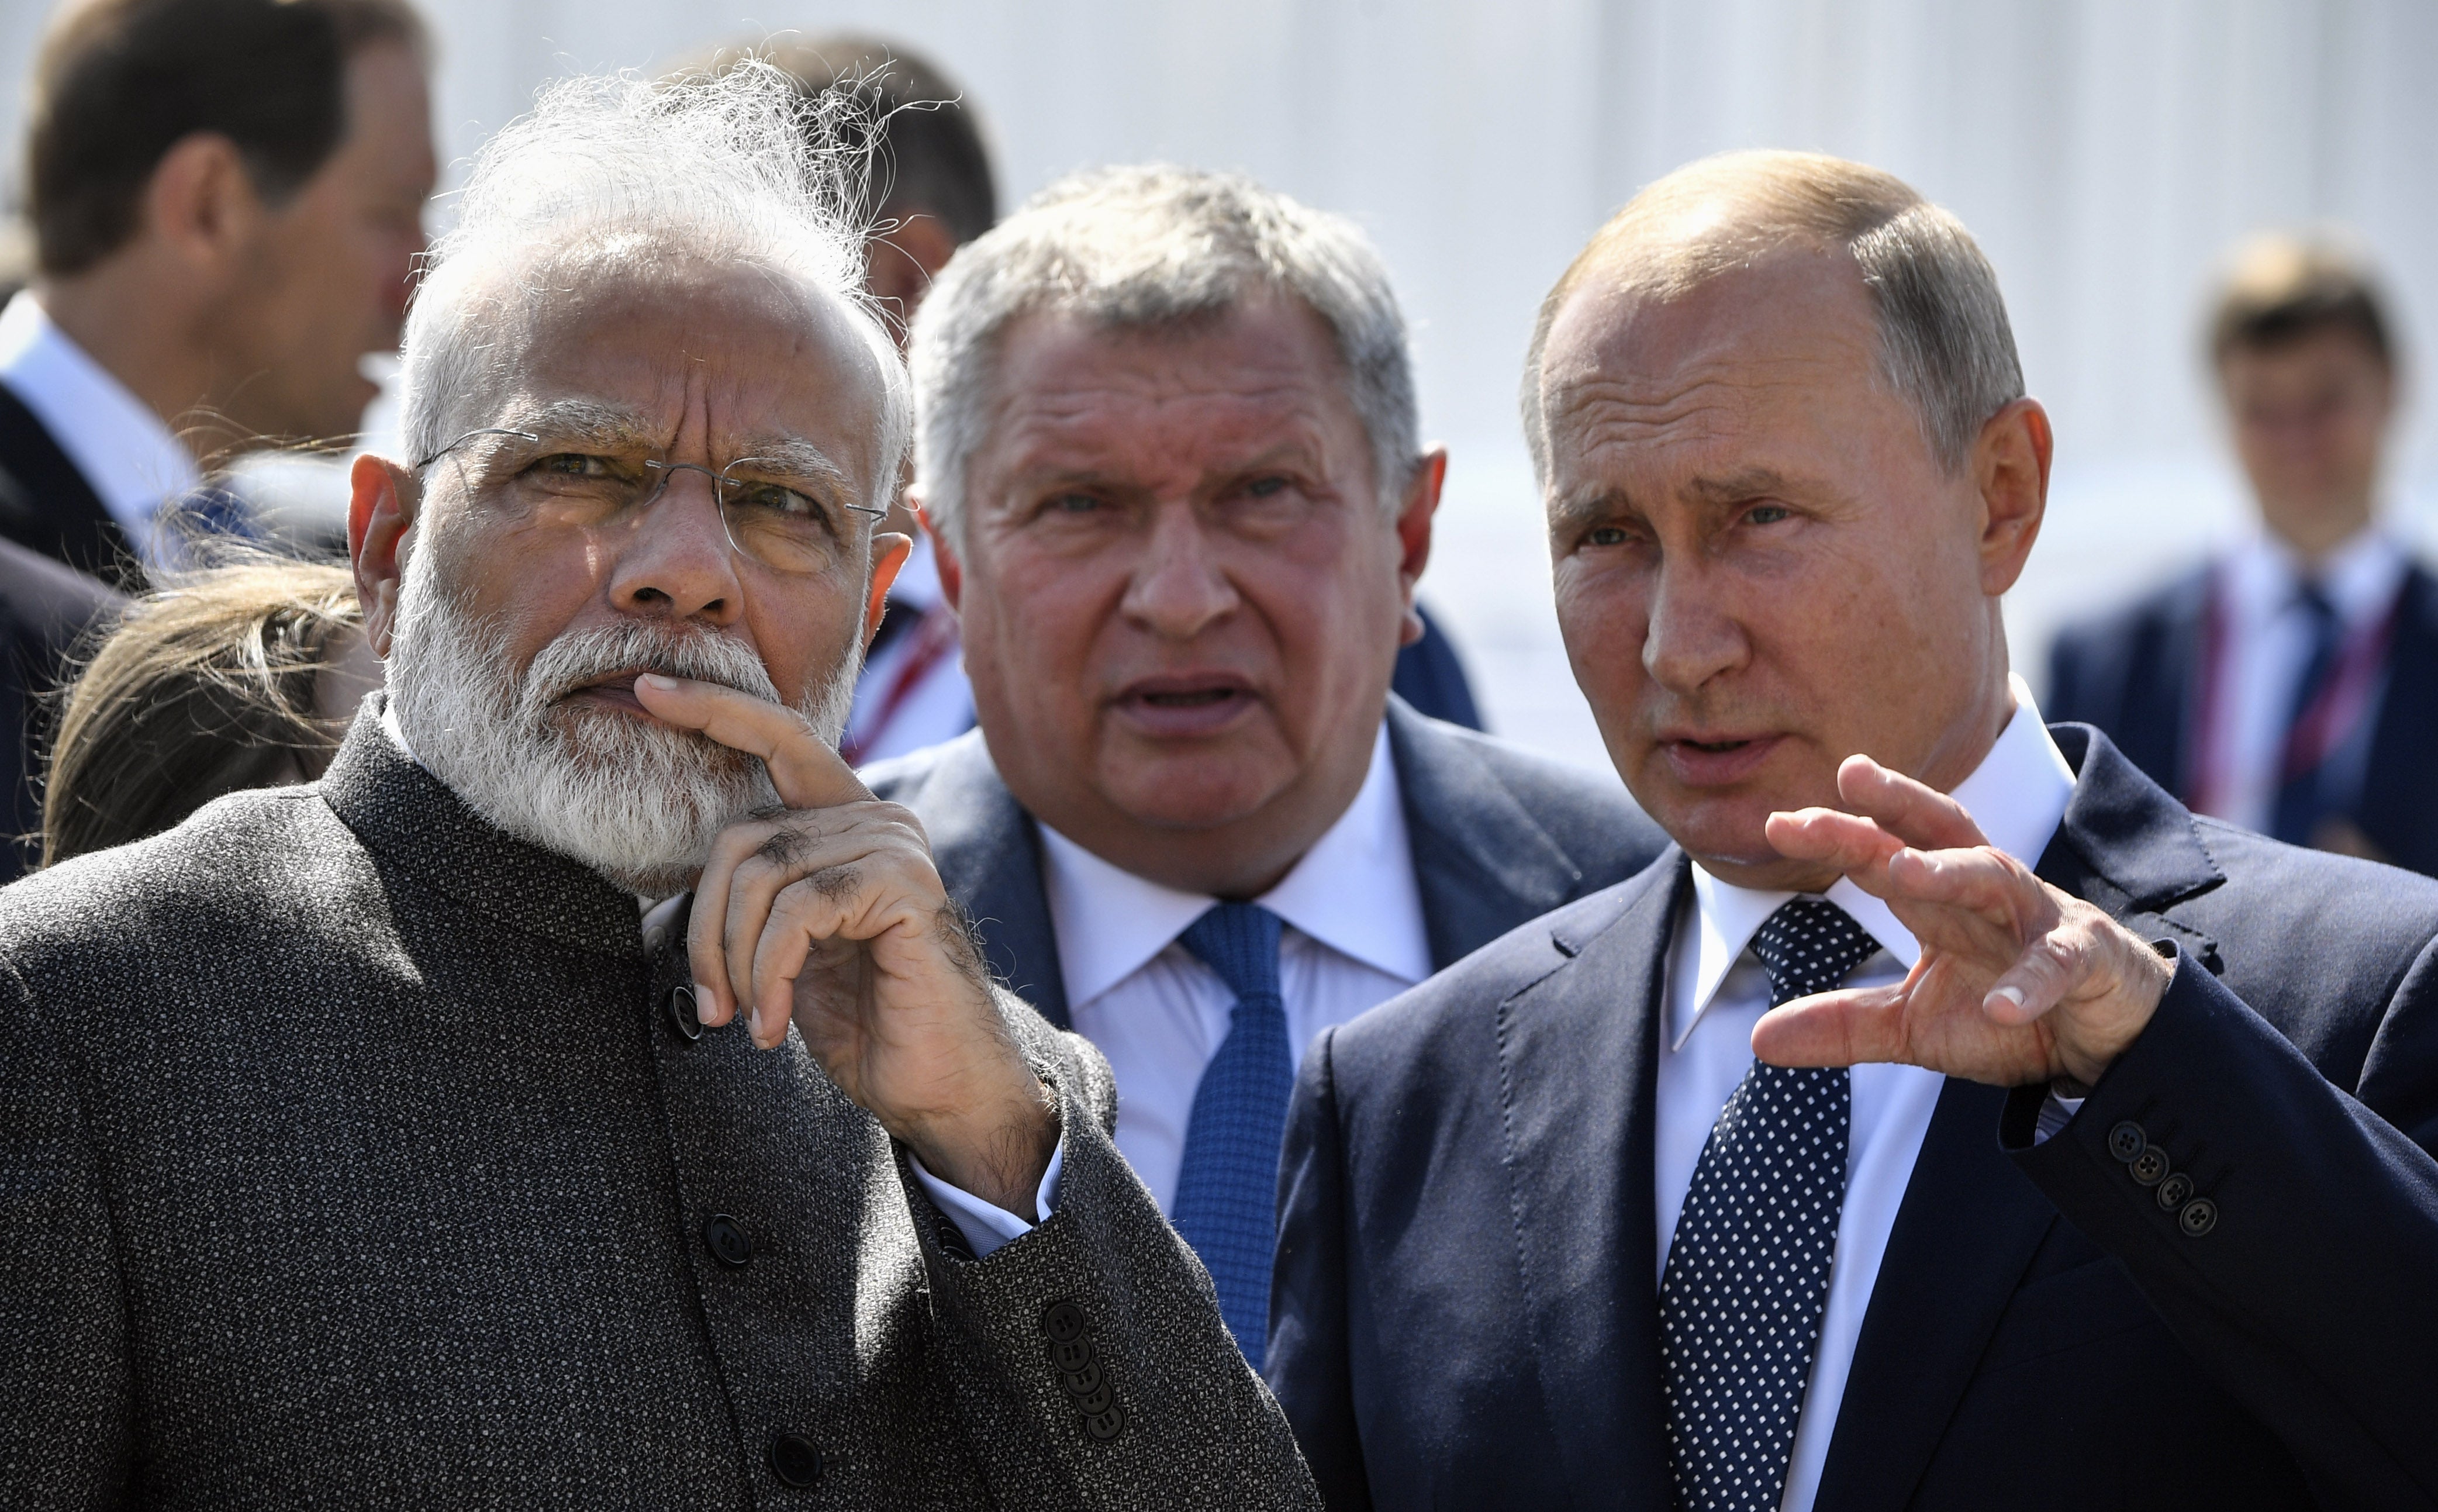 Russia’s president Vladimir Putin (R) speaks with India’s prime minister Narendra Modi (L) during a visit to the shipyard Zvezda, as Rosneft Russian oil giant chief Igor Sechin (C) accompanies them, outside the far-eastern Russian port of Vladivostok in 2019